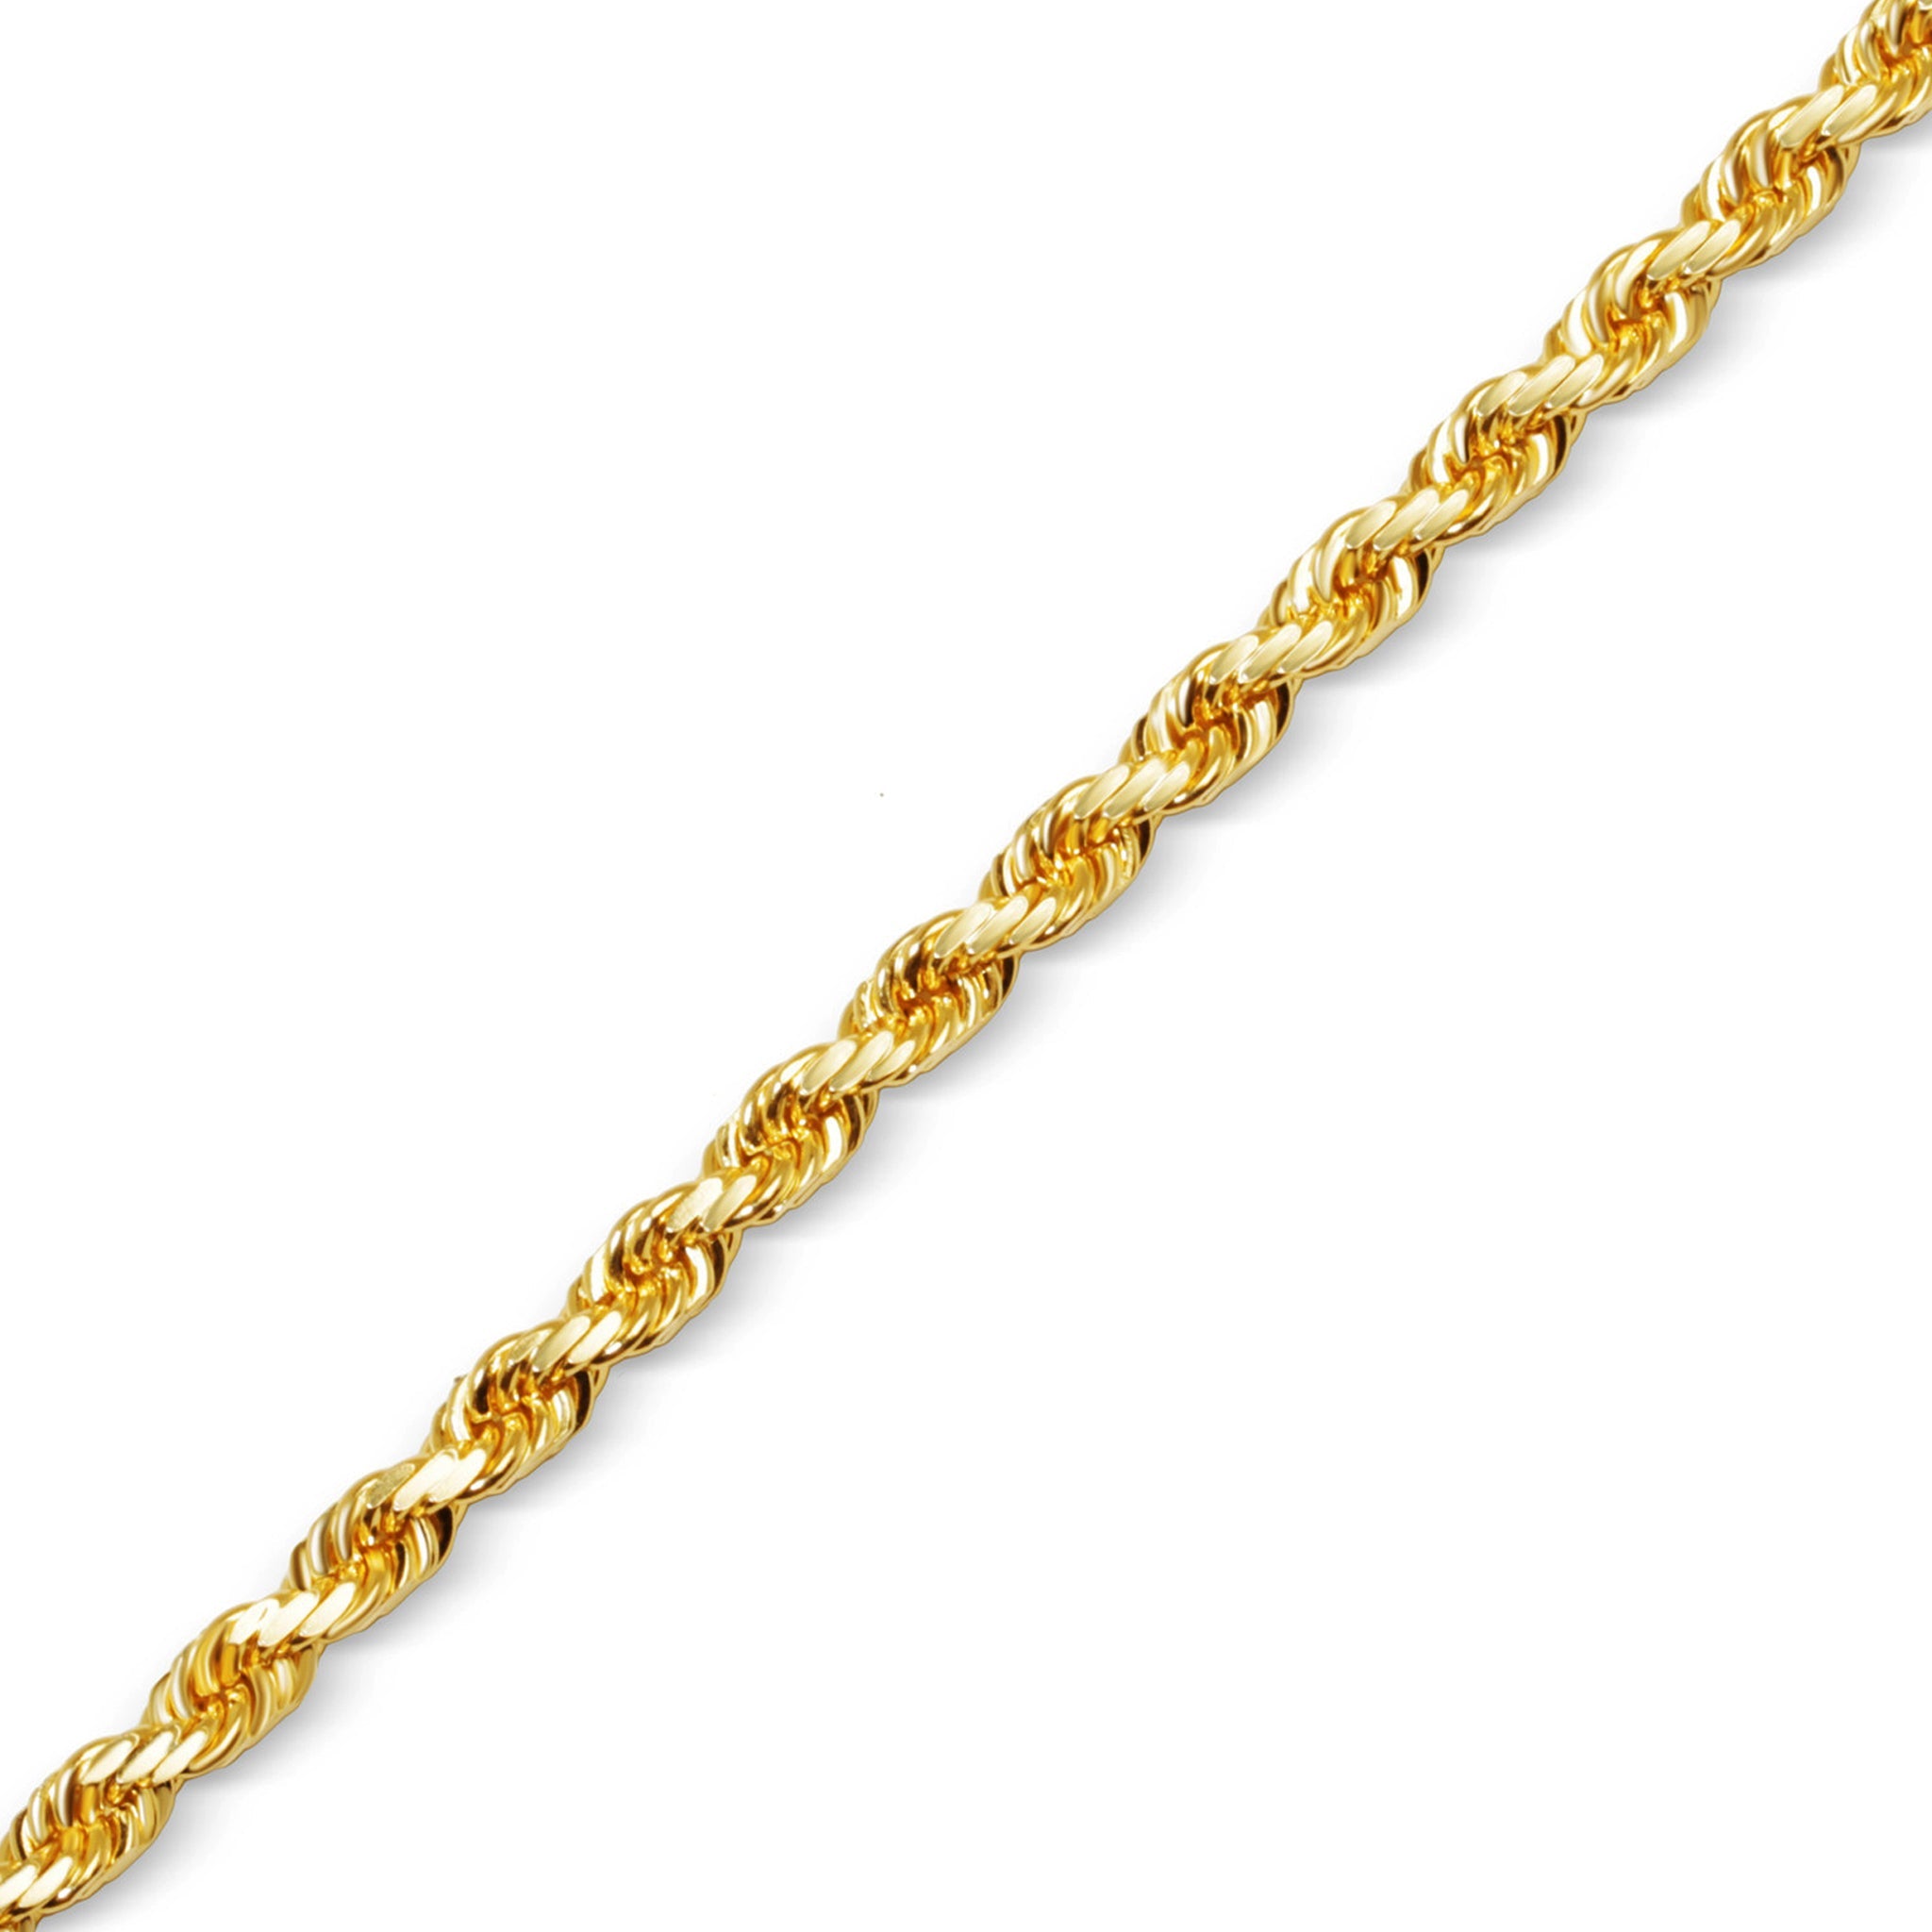 Gold Rope Chain (7mm) - IF & Co.